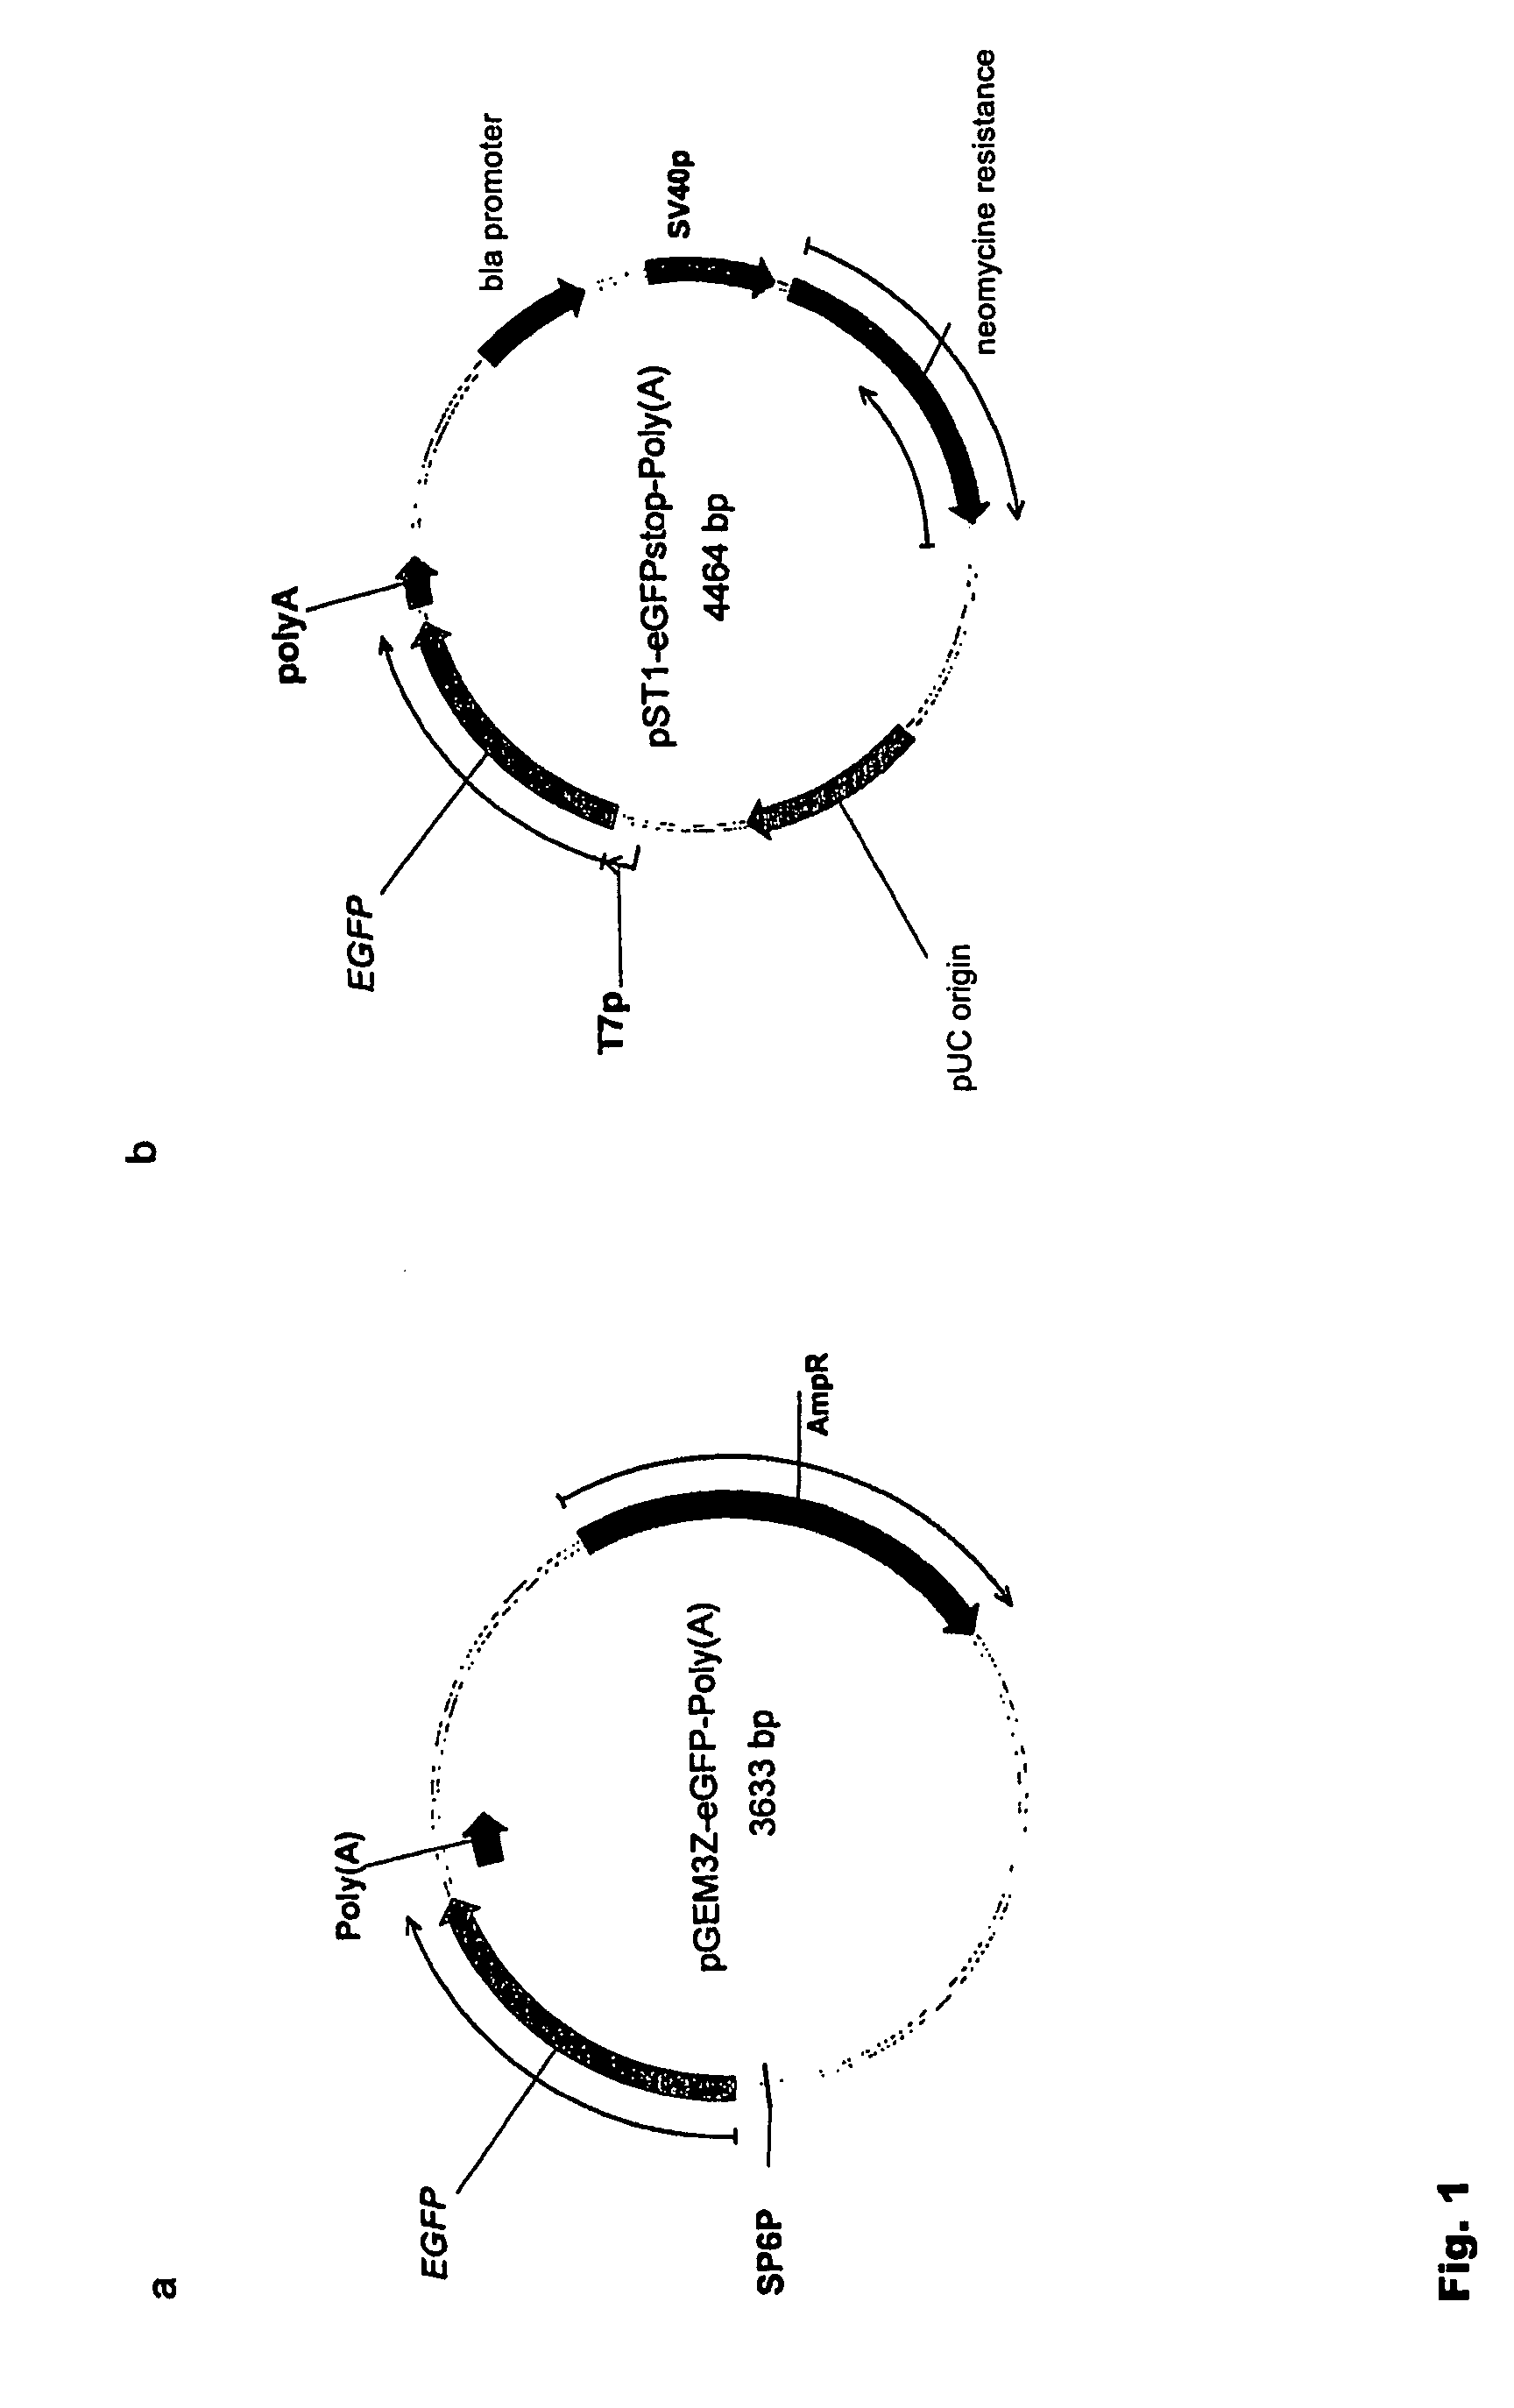 Modification of RNA, producing an increased transcript stability and translation efficiency